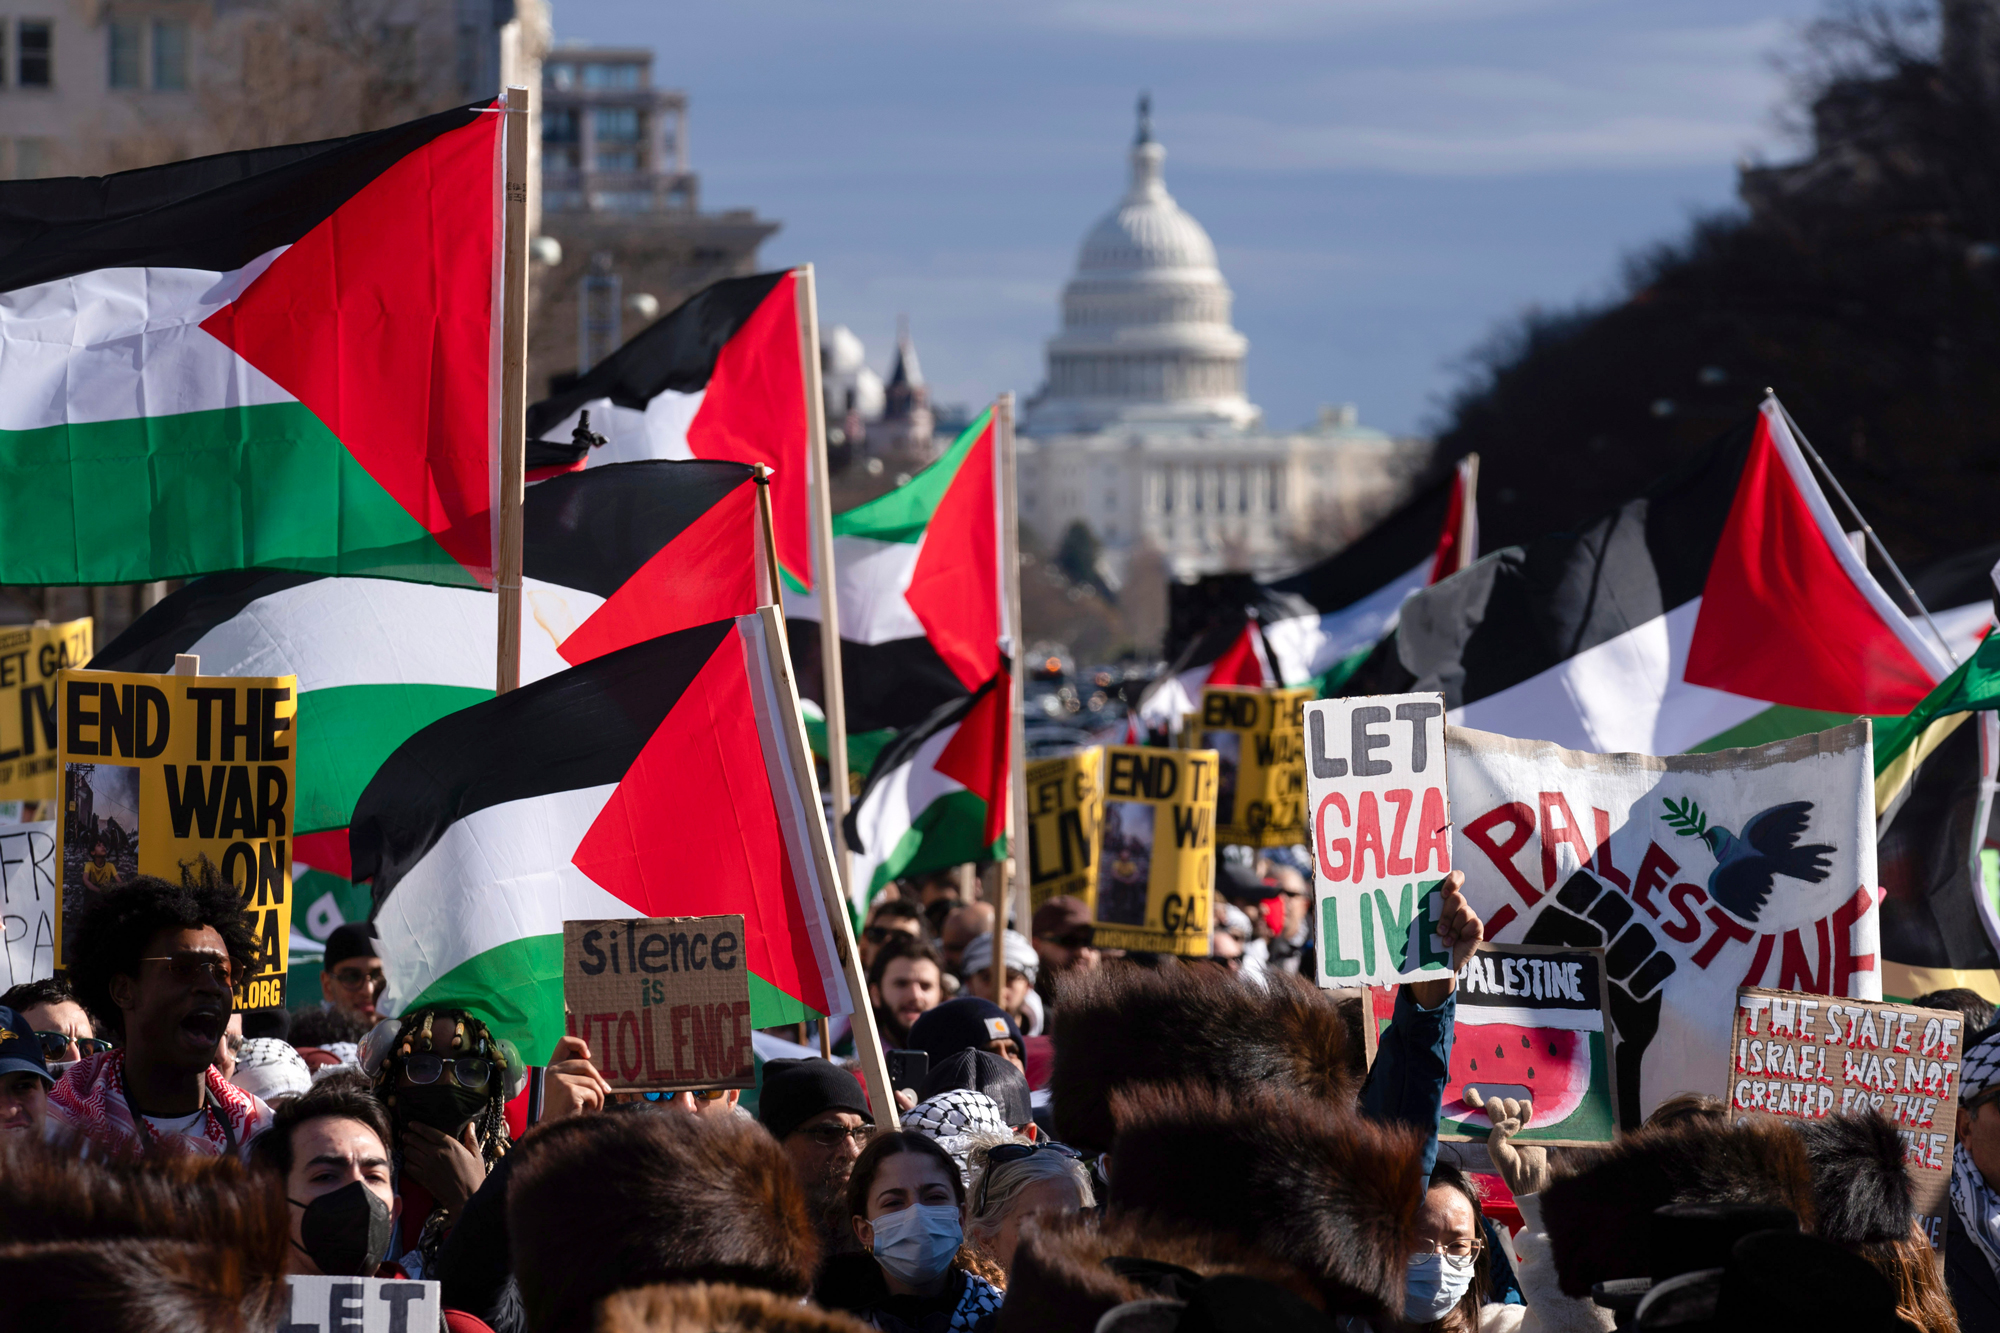 With the US Capitol in the background, demonstrators rally during the March on Washington for Gaza at Freedom Plaza in Washington, DC, on January 13.